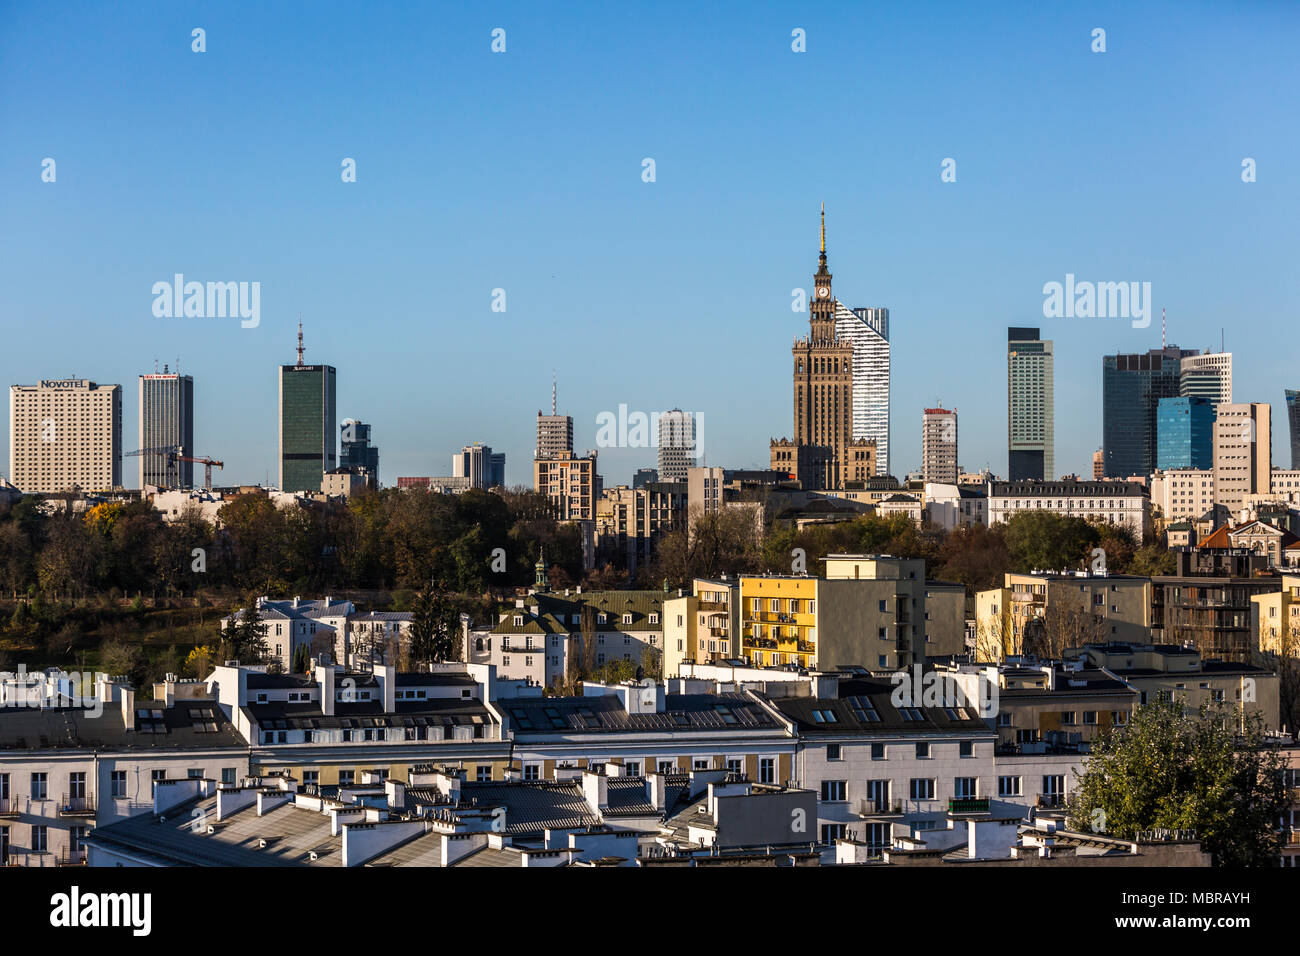 City view, skyscrapers in the city centre with Palace of Culture and Science, Pałac Kultury i Nauki,Warsaw, Poland Stock Photo